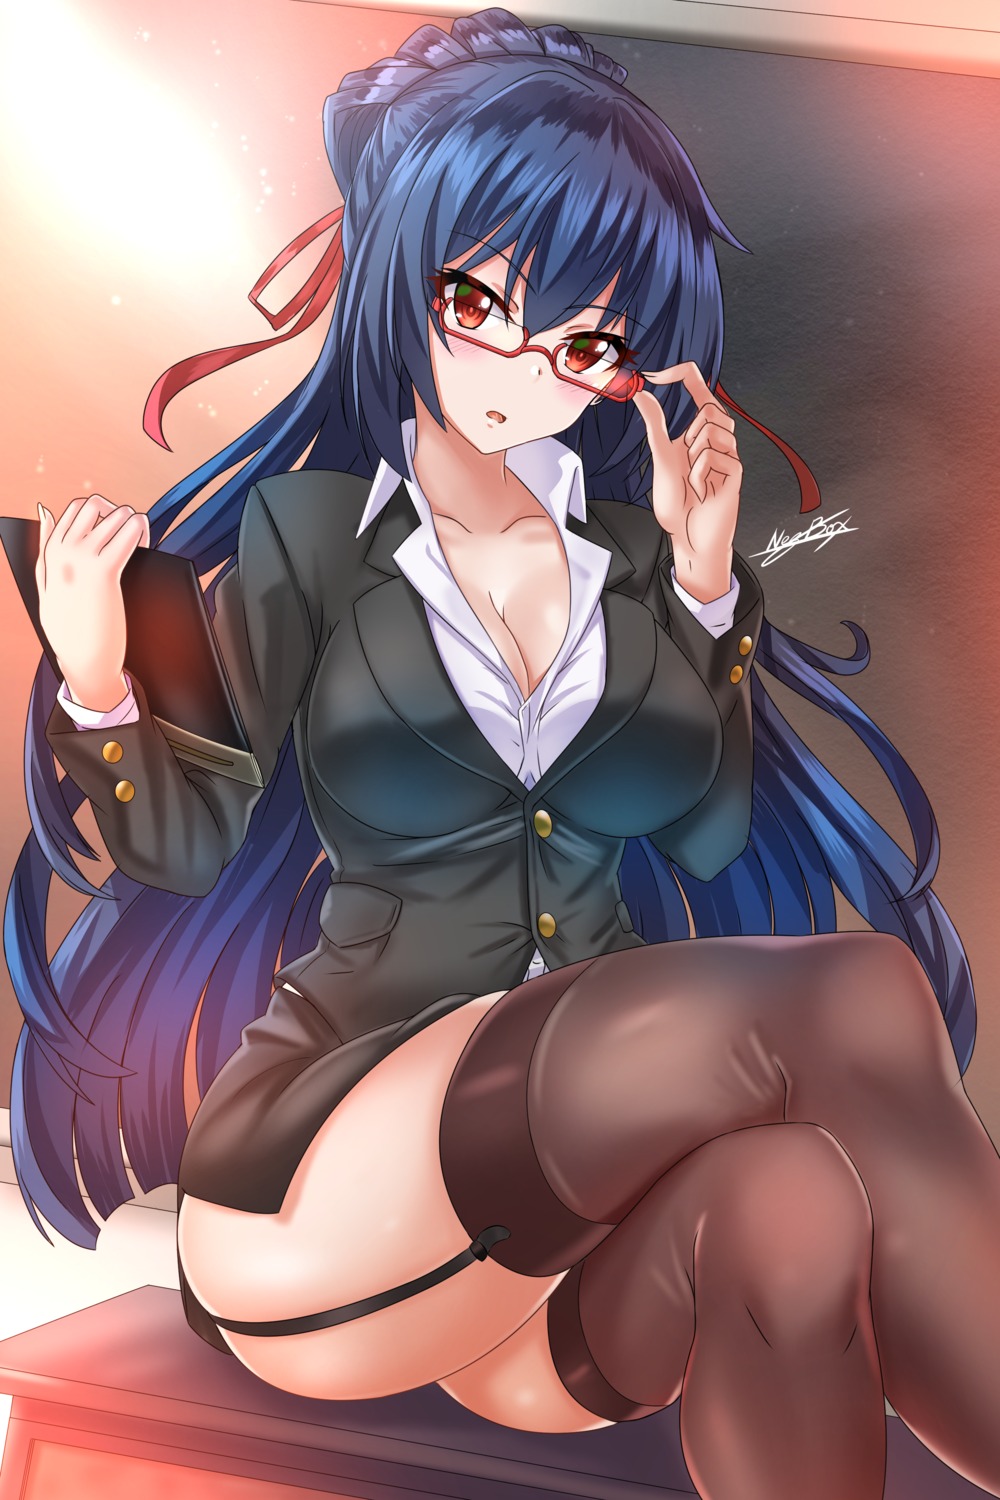 business_suit cleavage megane nez-kun stockings thighhighs